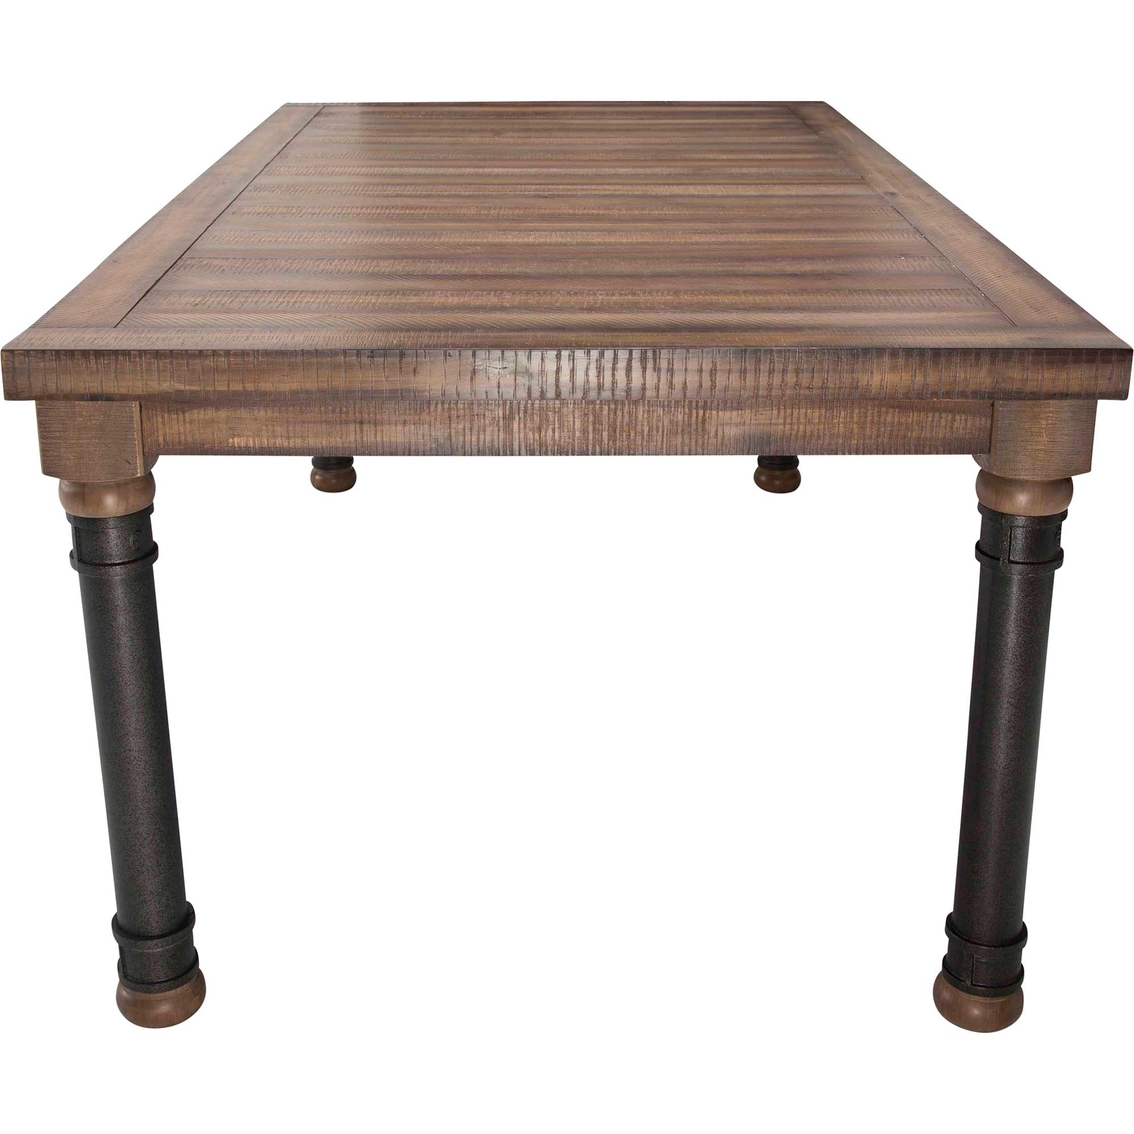 Kathy Ireland Home Crossings Rectangular Dining Table - Image 4 of 8